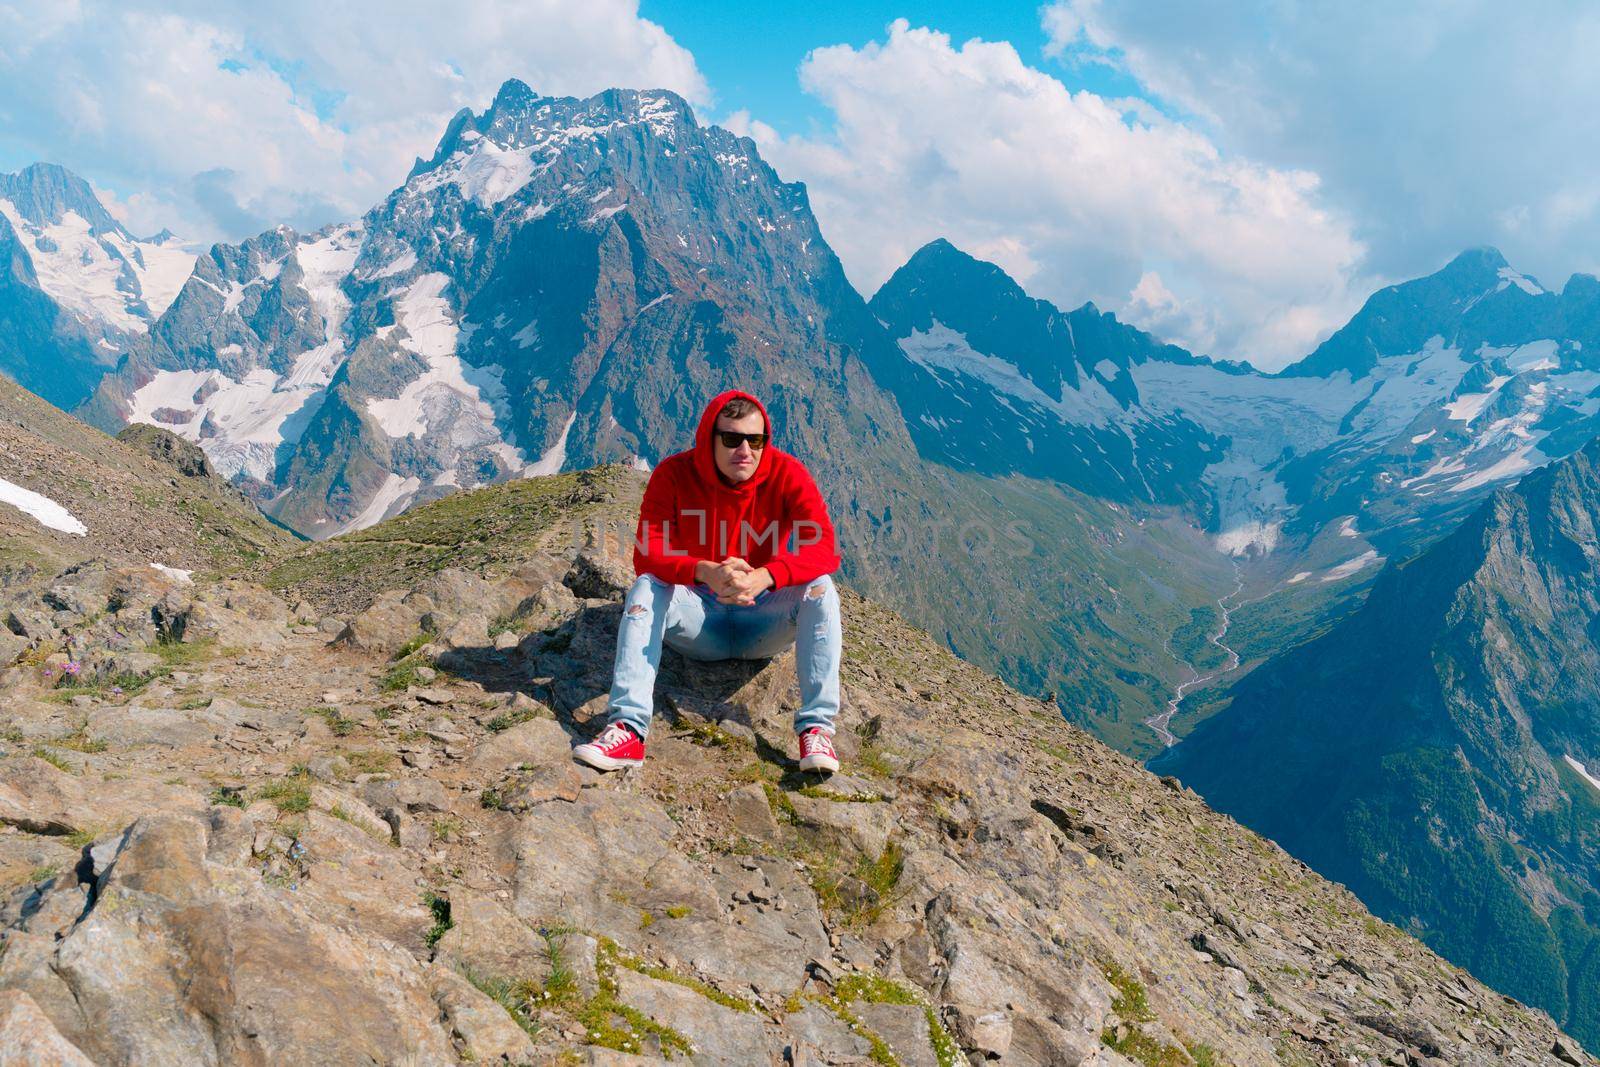 Adult male in red hoodie with hood enjoying beautiful view in mountainous area.